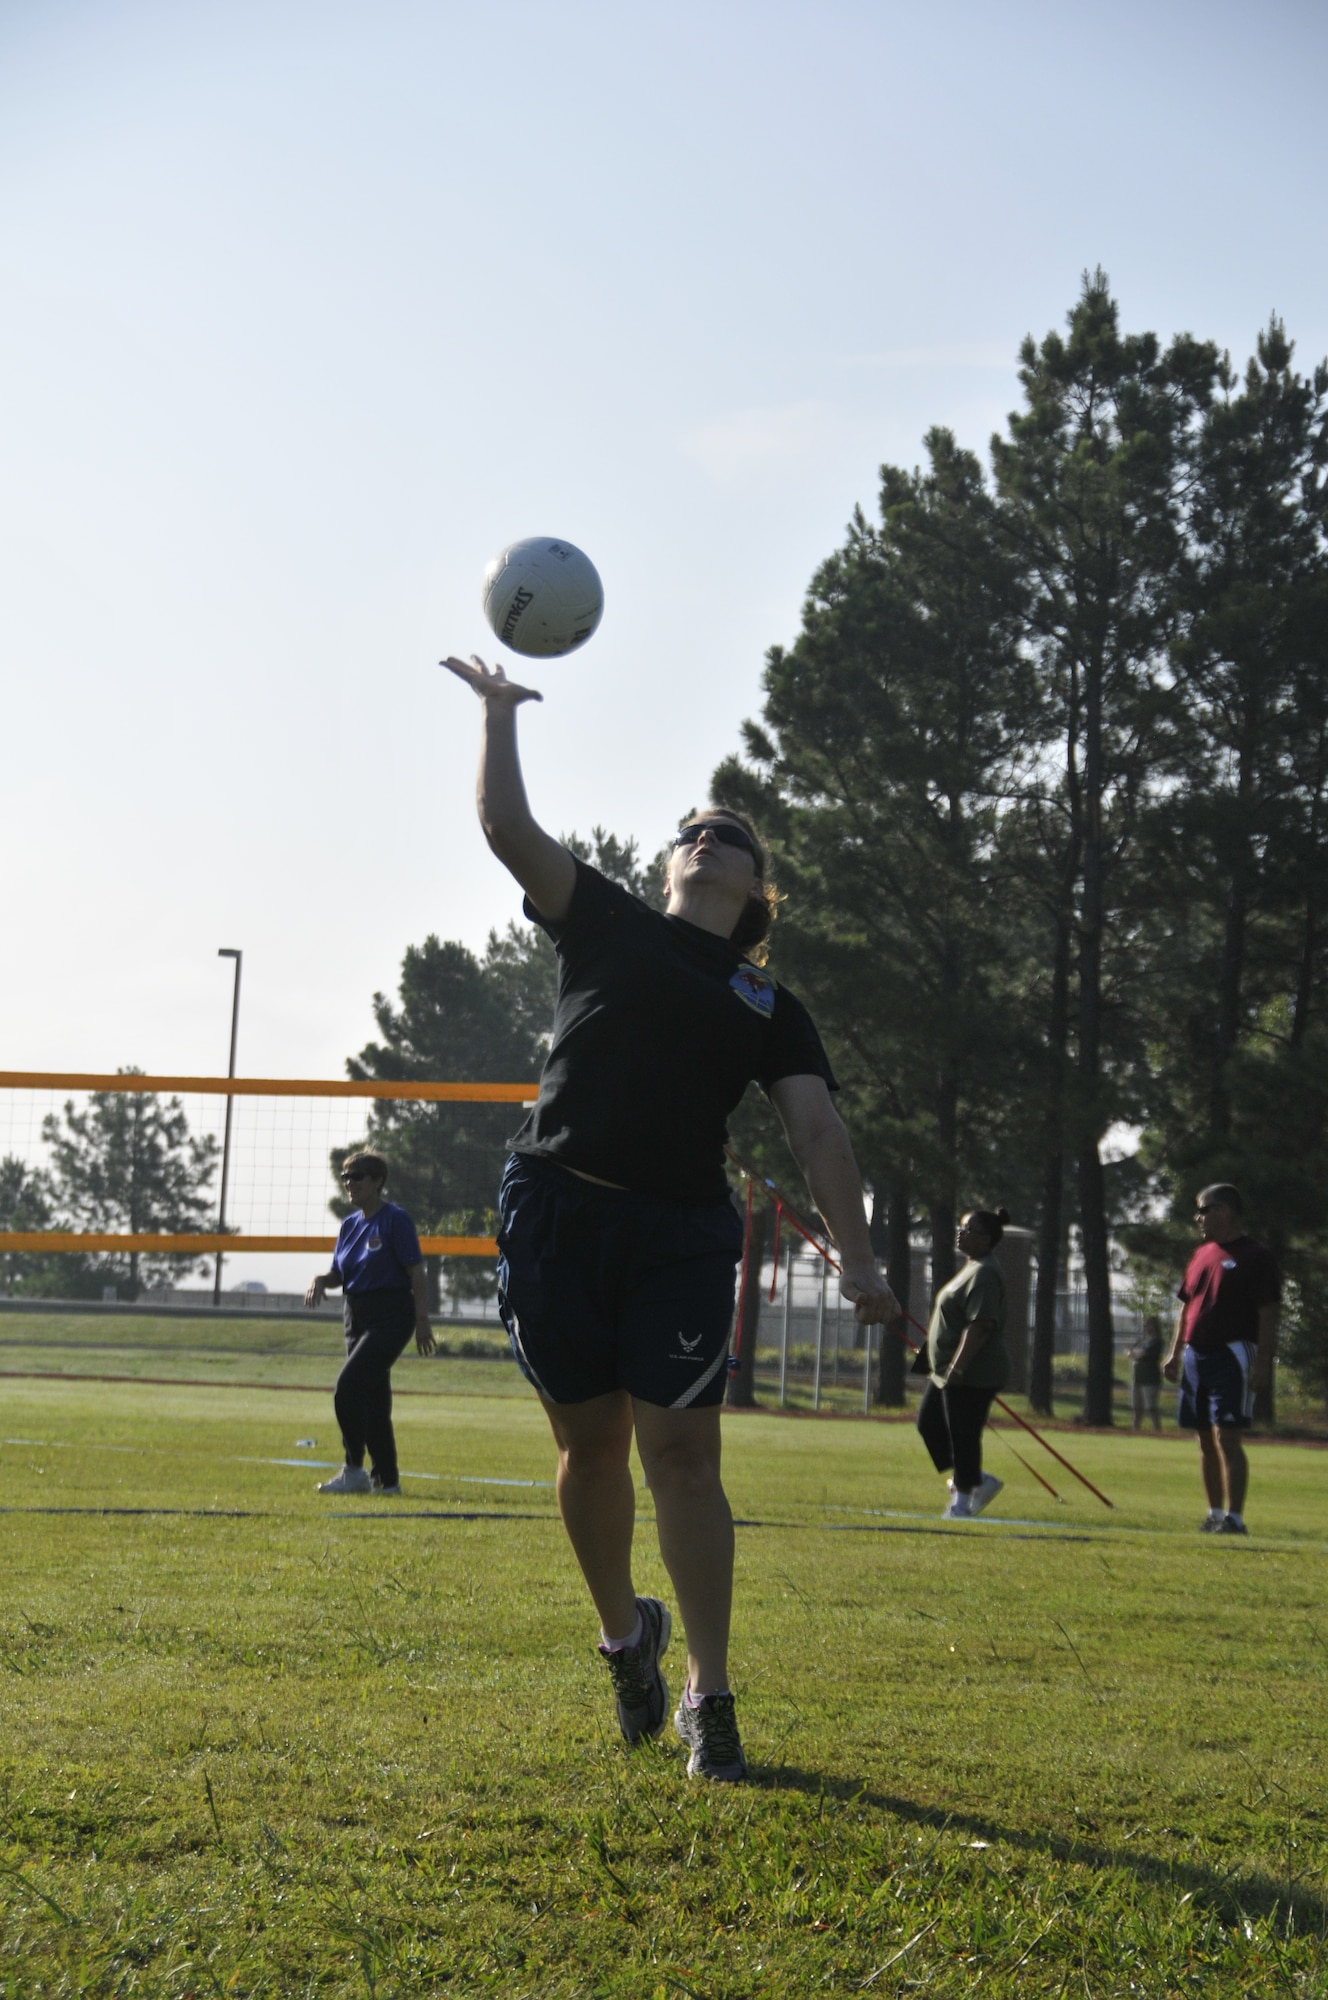 Members of the 188th Wing participate in a Wingman Day volleyball event held at Ebbing Air National Guard Base, Fort Smith, Arkansas, Aug. 2. The purpose of the event was to foster teamwork and cohesiveness in the unit. (U.S. Air National Guard photo by Staff Sgt. John Suleski/released)